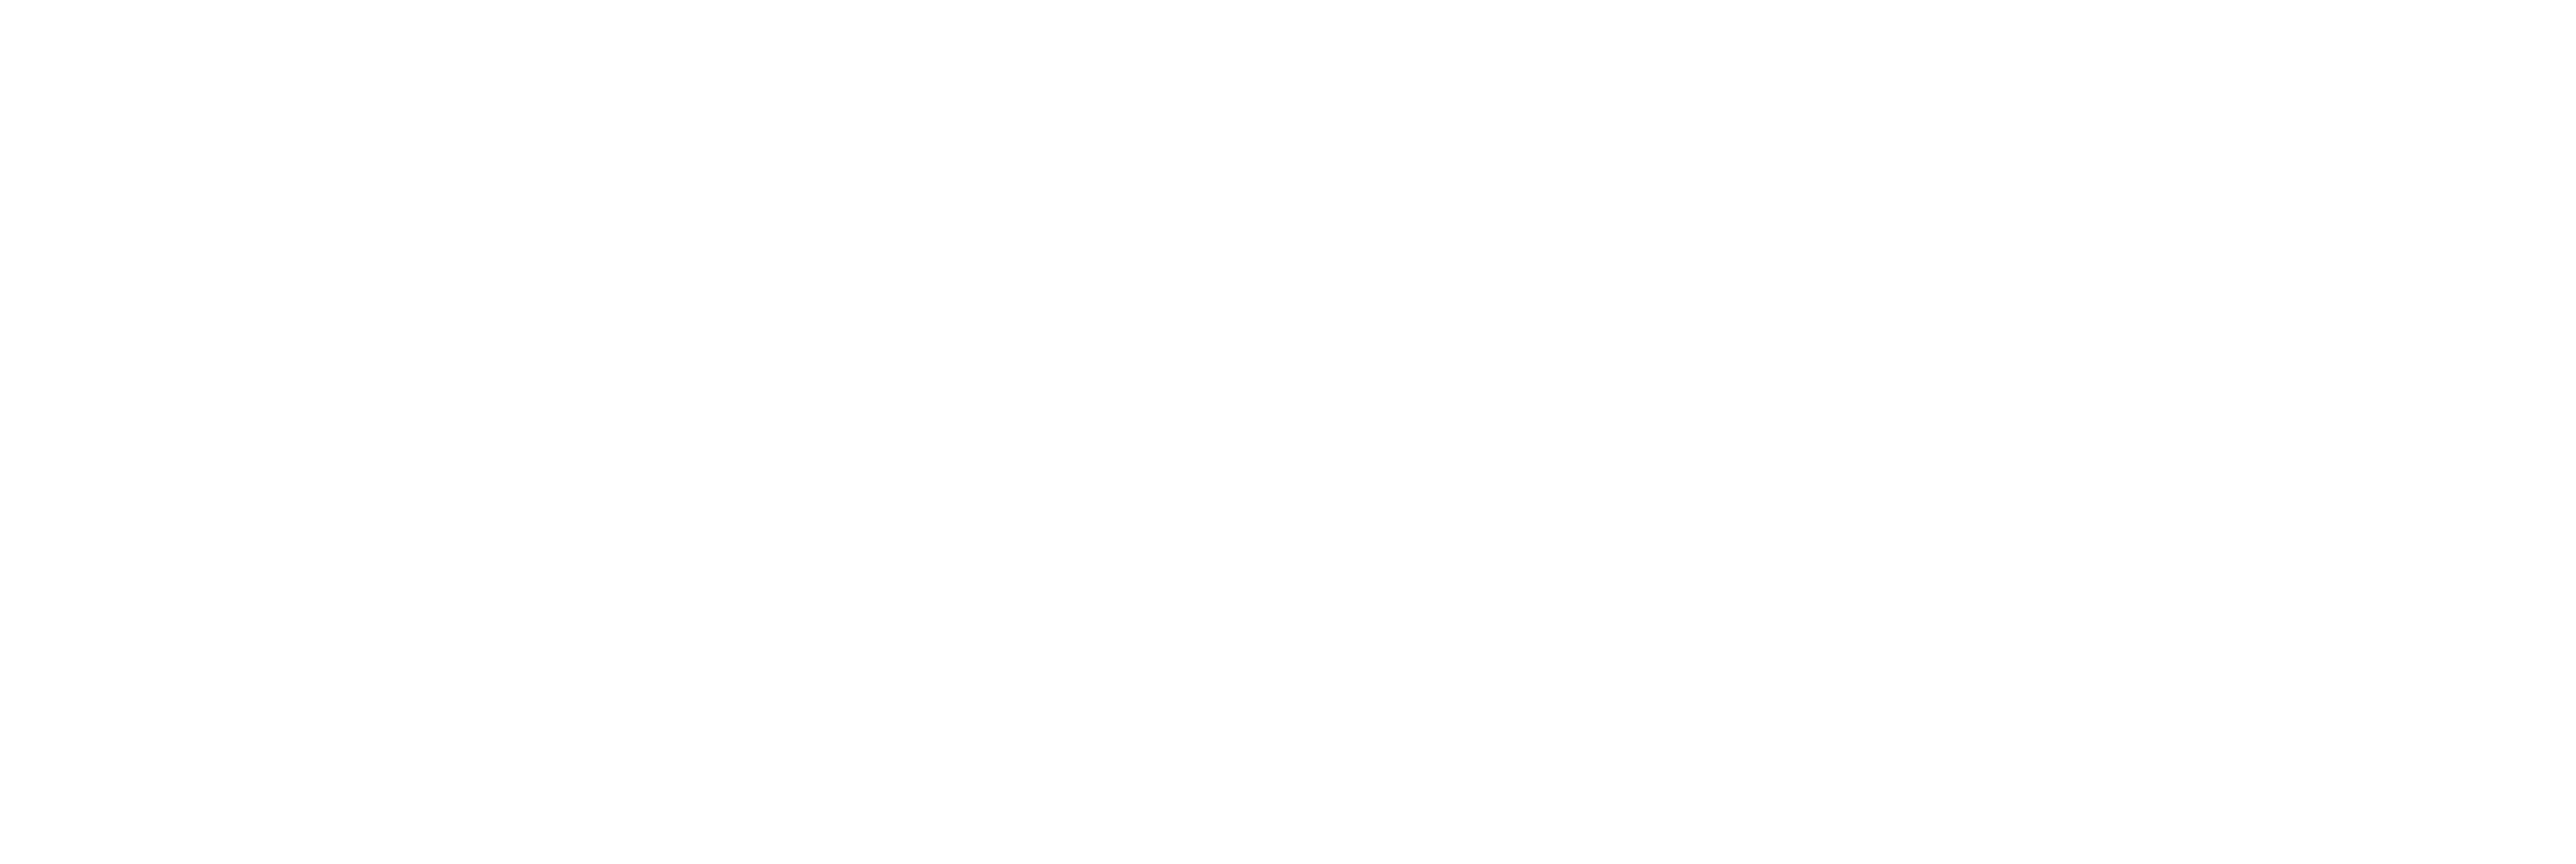 A black and white logo of matrix digital systems